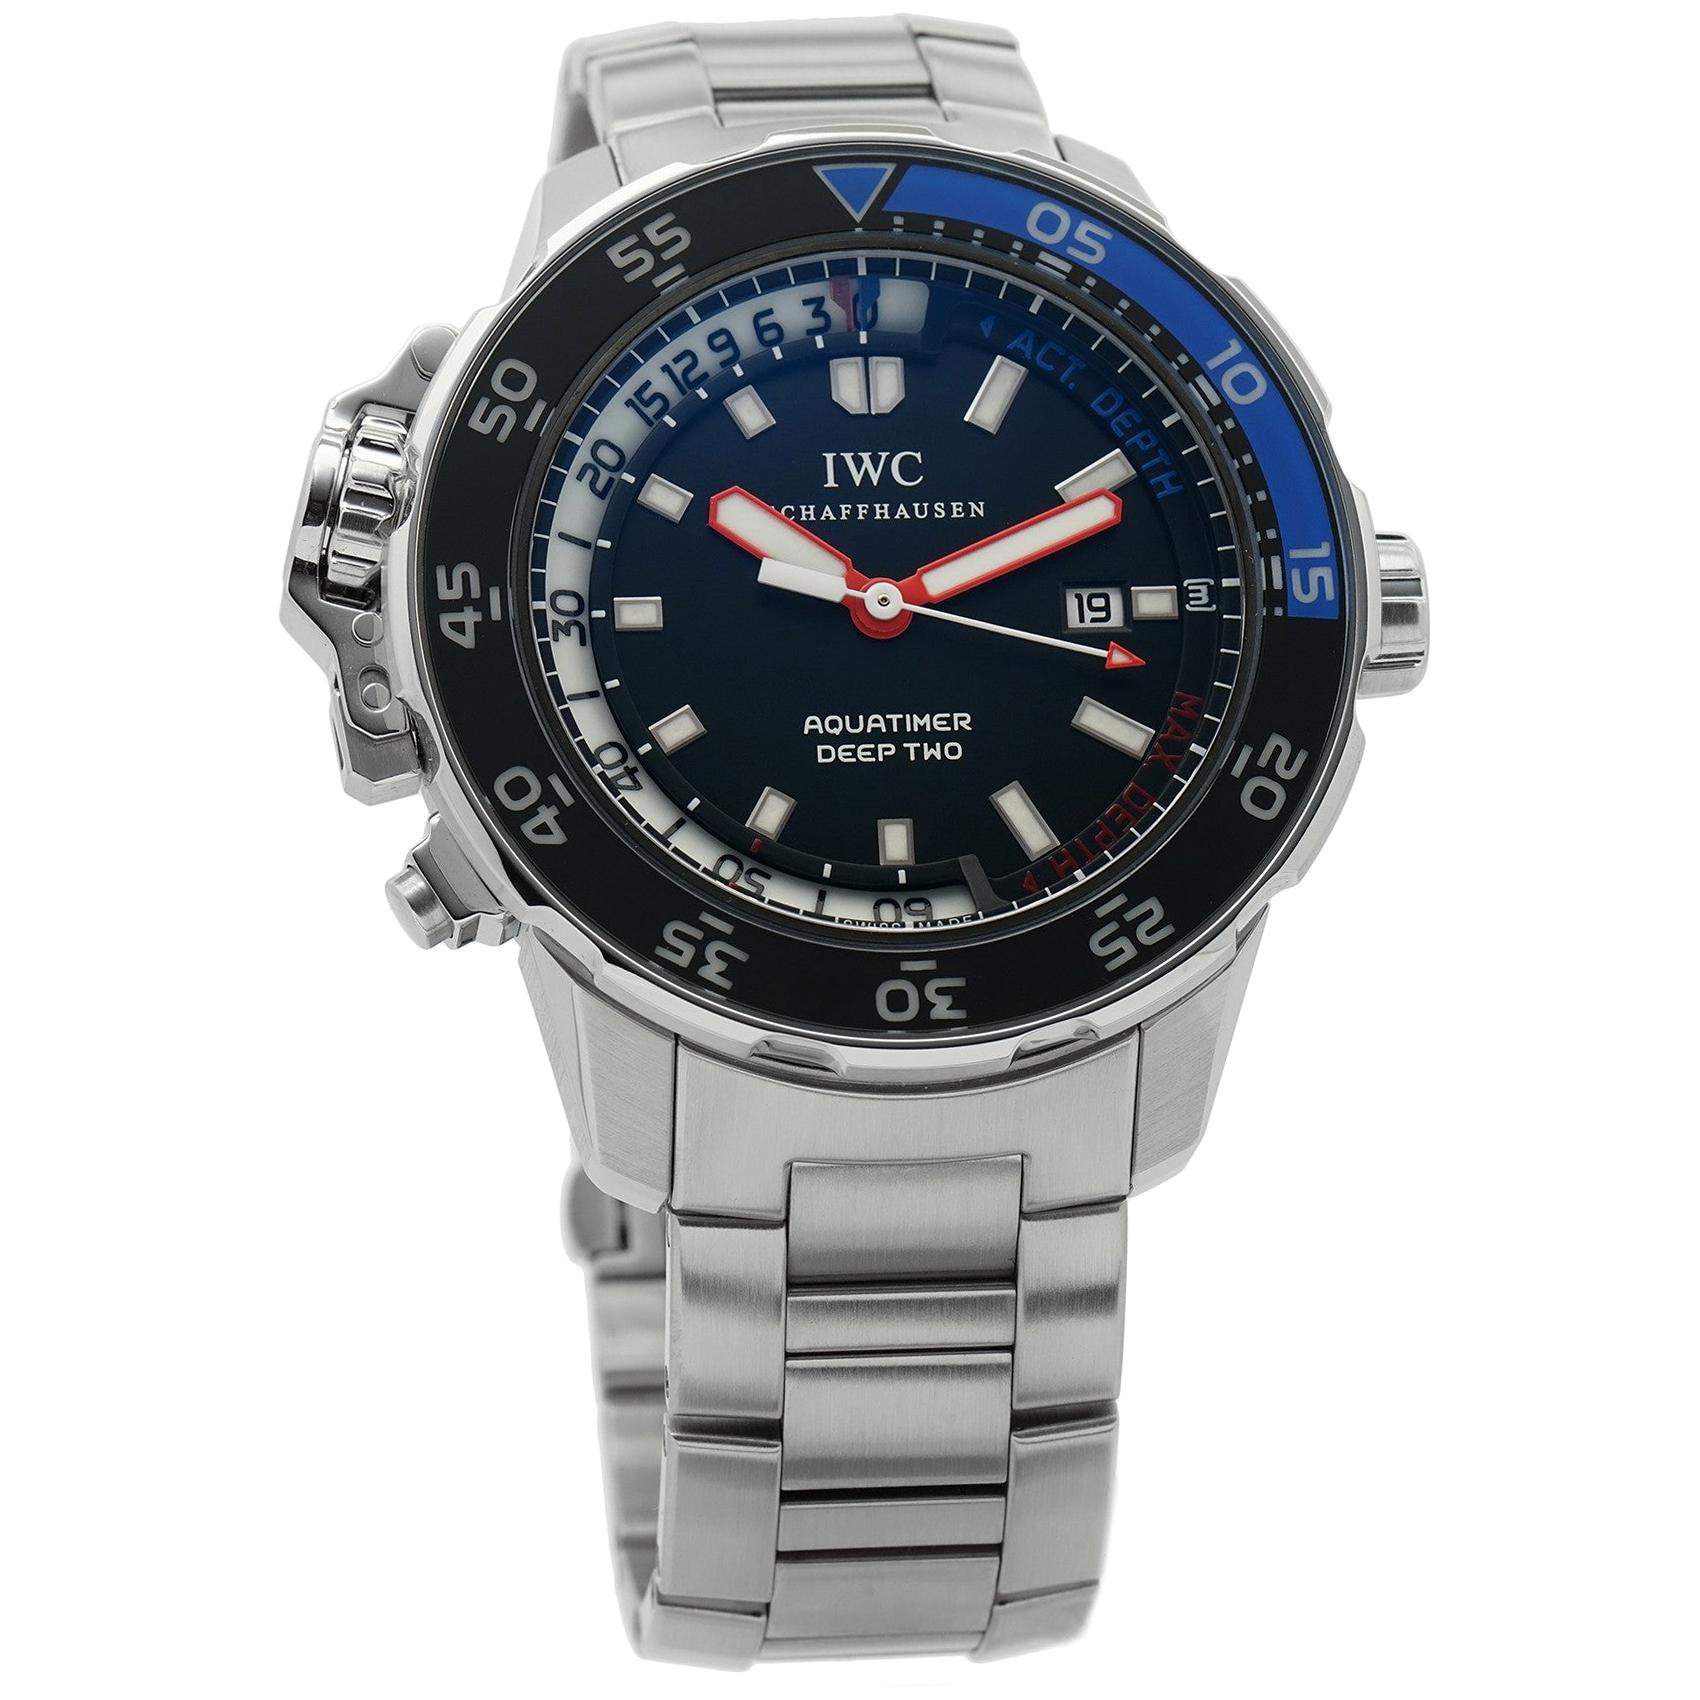 IWC Aquatimer IW354702, Black Dial, Certified and Warranty For Sale